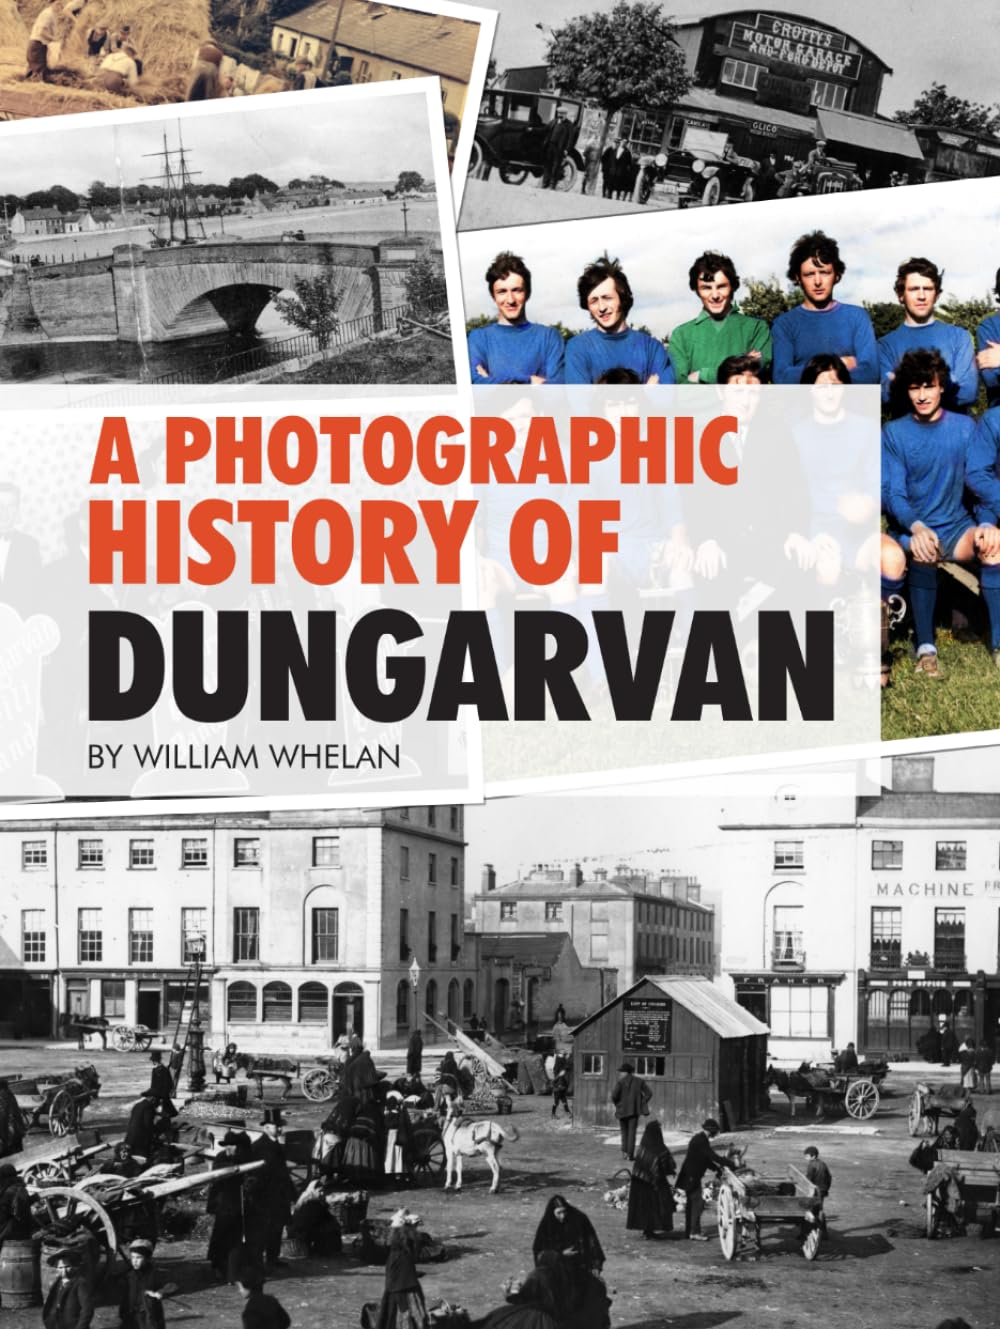 A Photographic History of Dungarvan by William Whelan